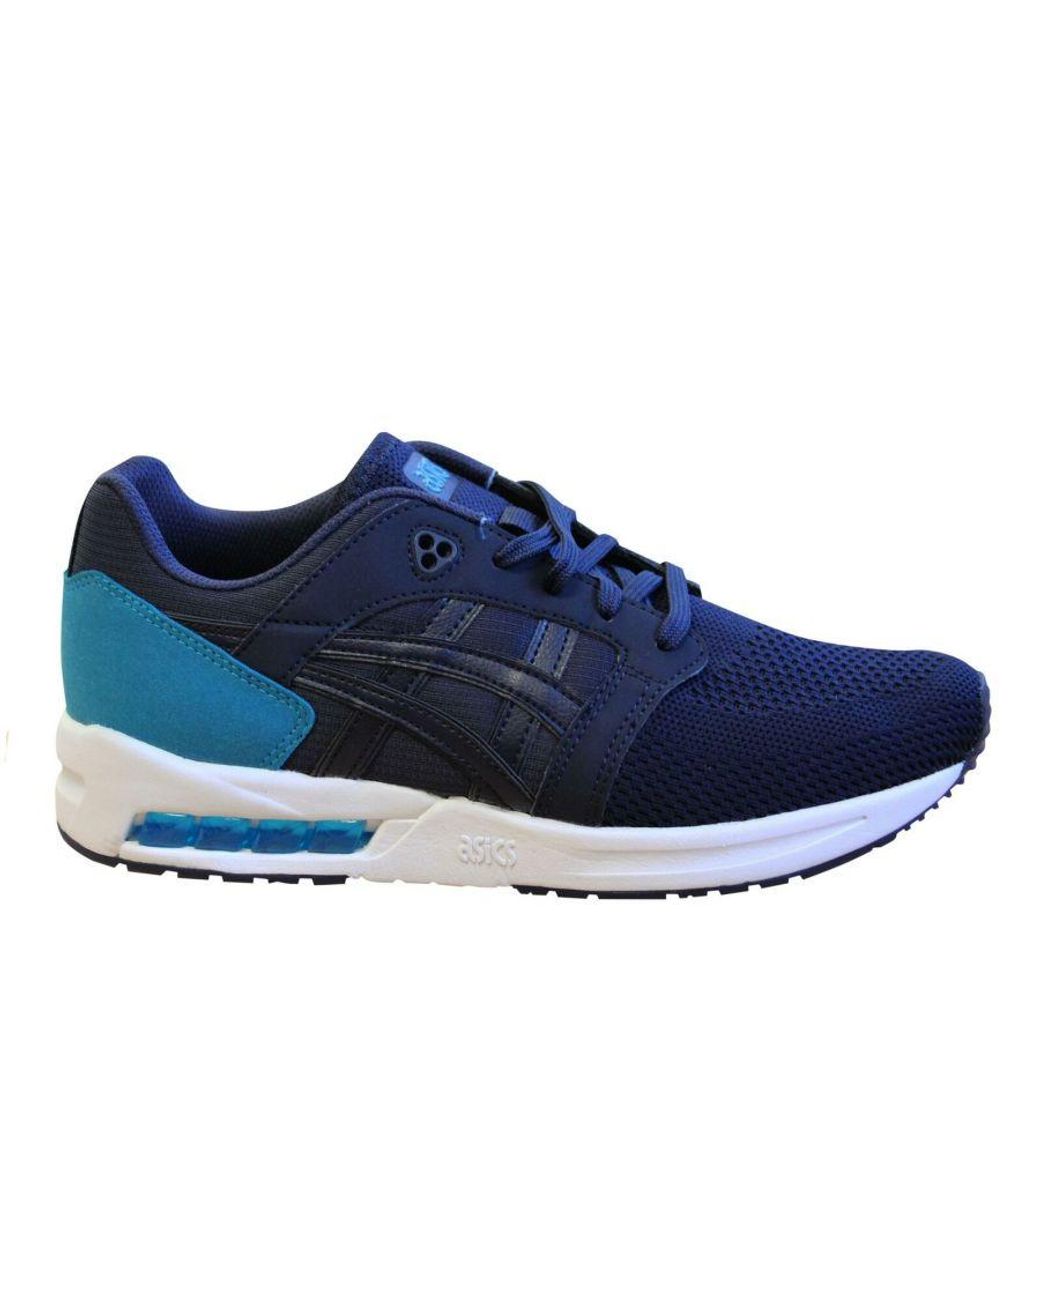 Asics Tiger Gelsaga Sou Blue Lace Up Running Trainers 1191a151 400 for Men  | Lyst UK